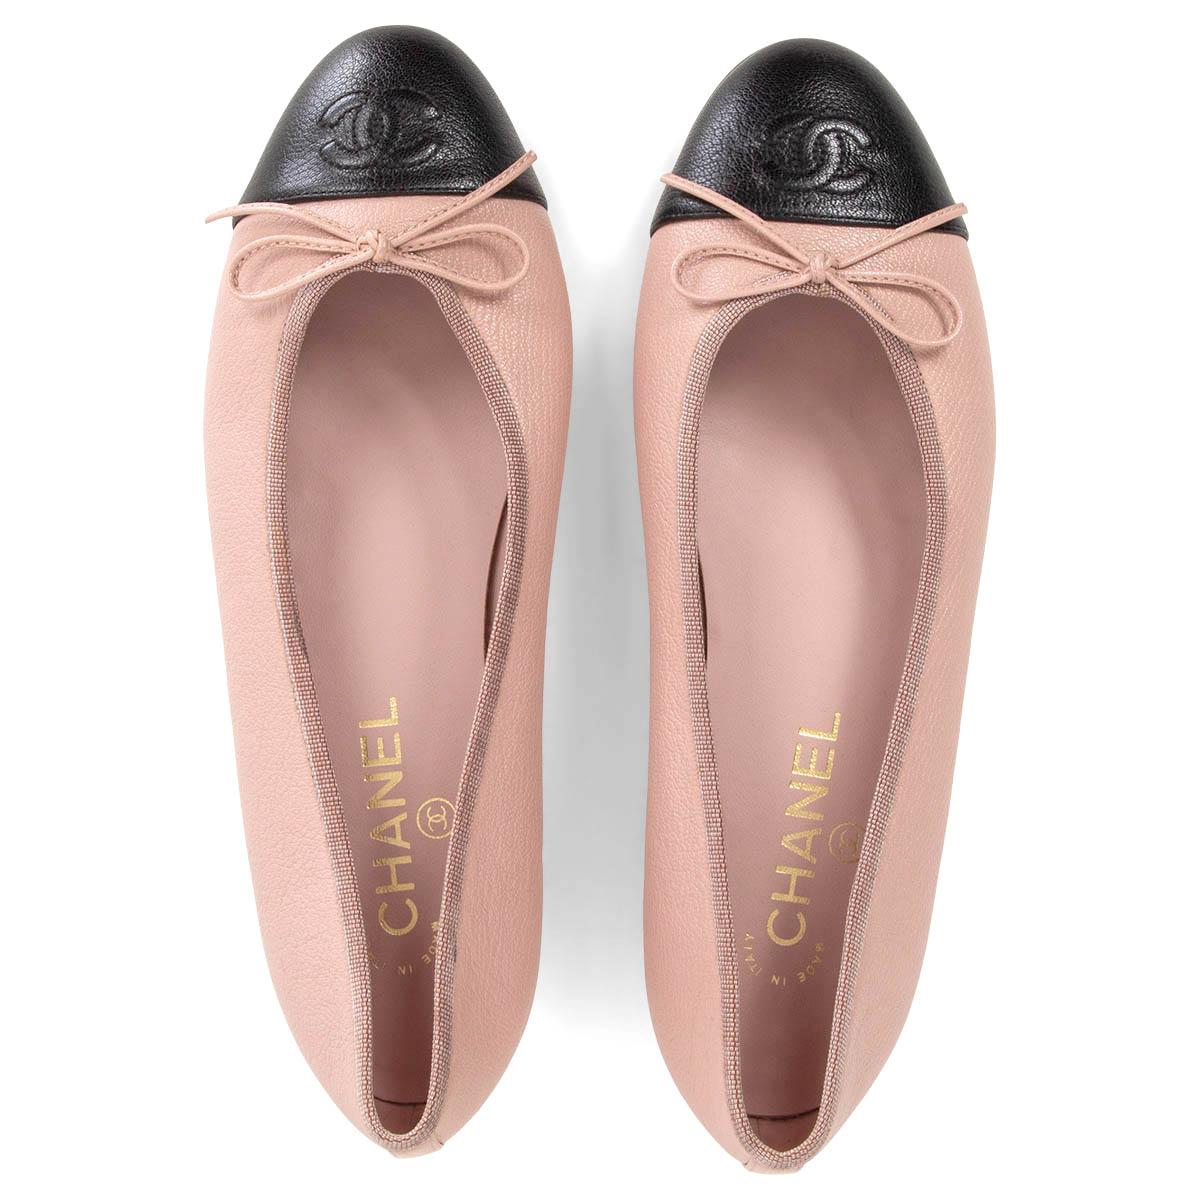 Beige CHANEL pink leather CLASSIC Ballet Flats Shoes 38.5